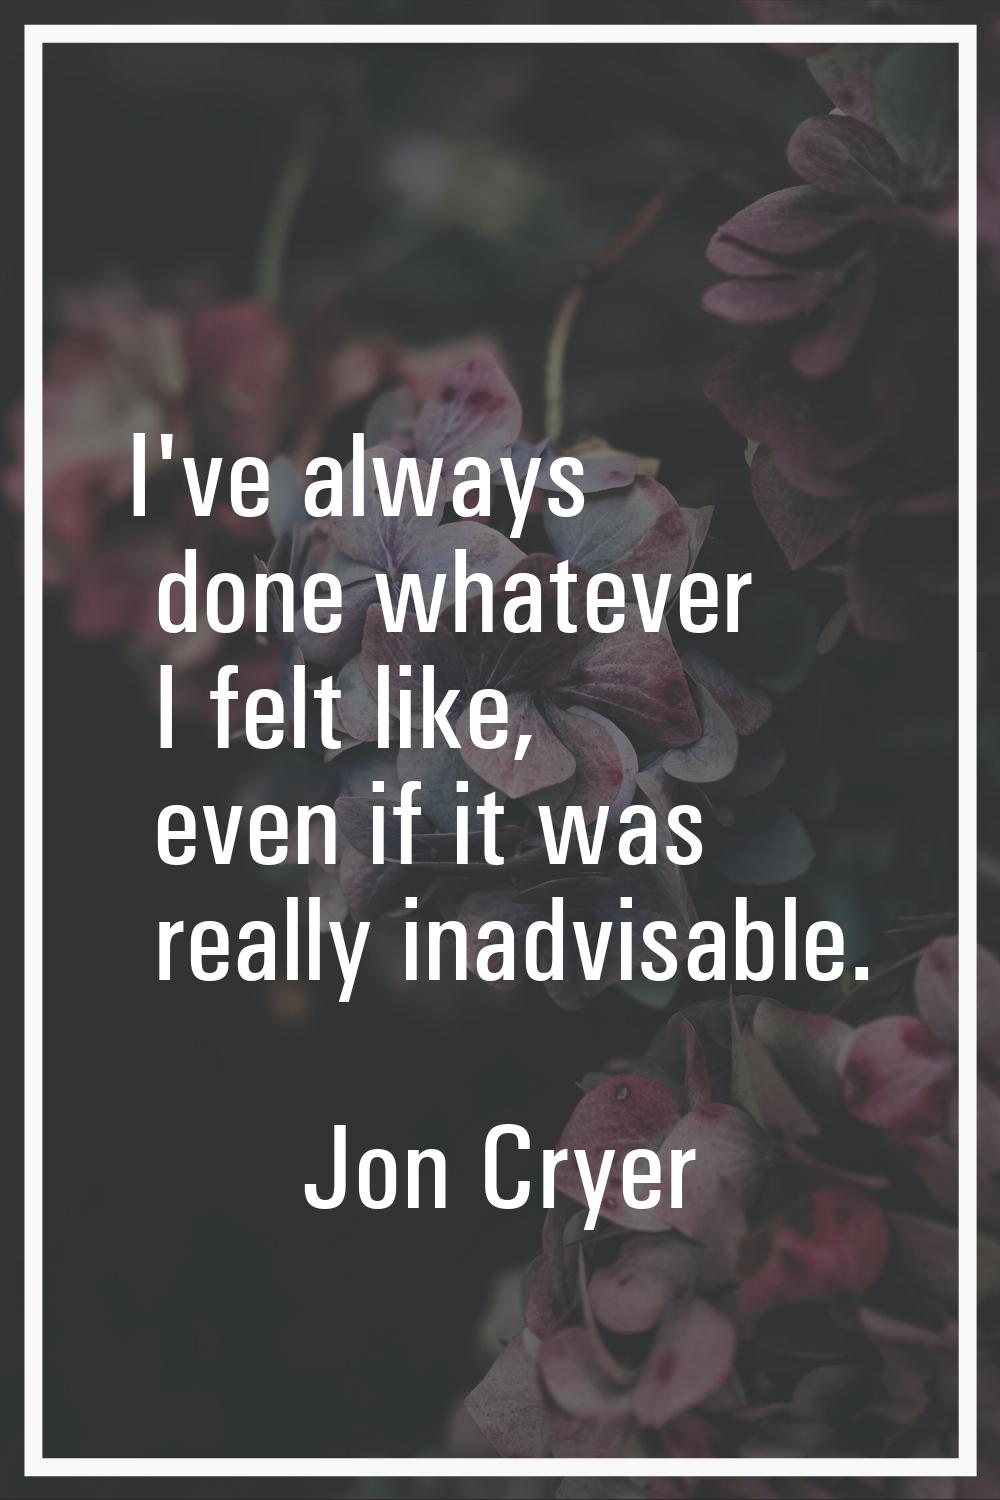 I've always done whatever I felt like, even if it was really inadvisable.